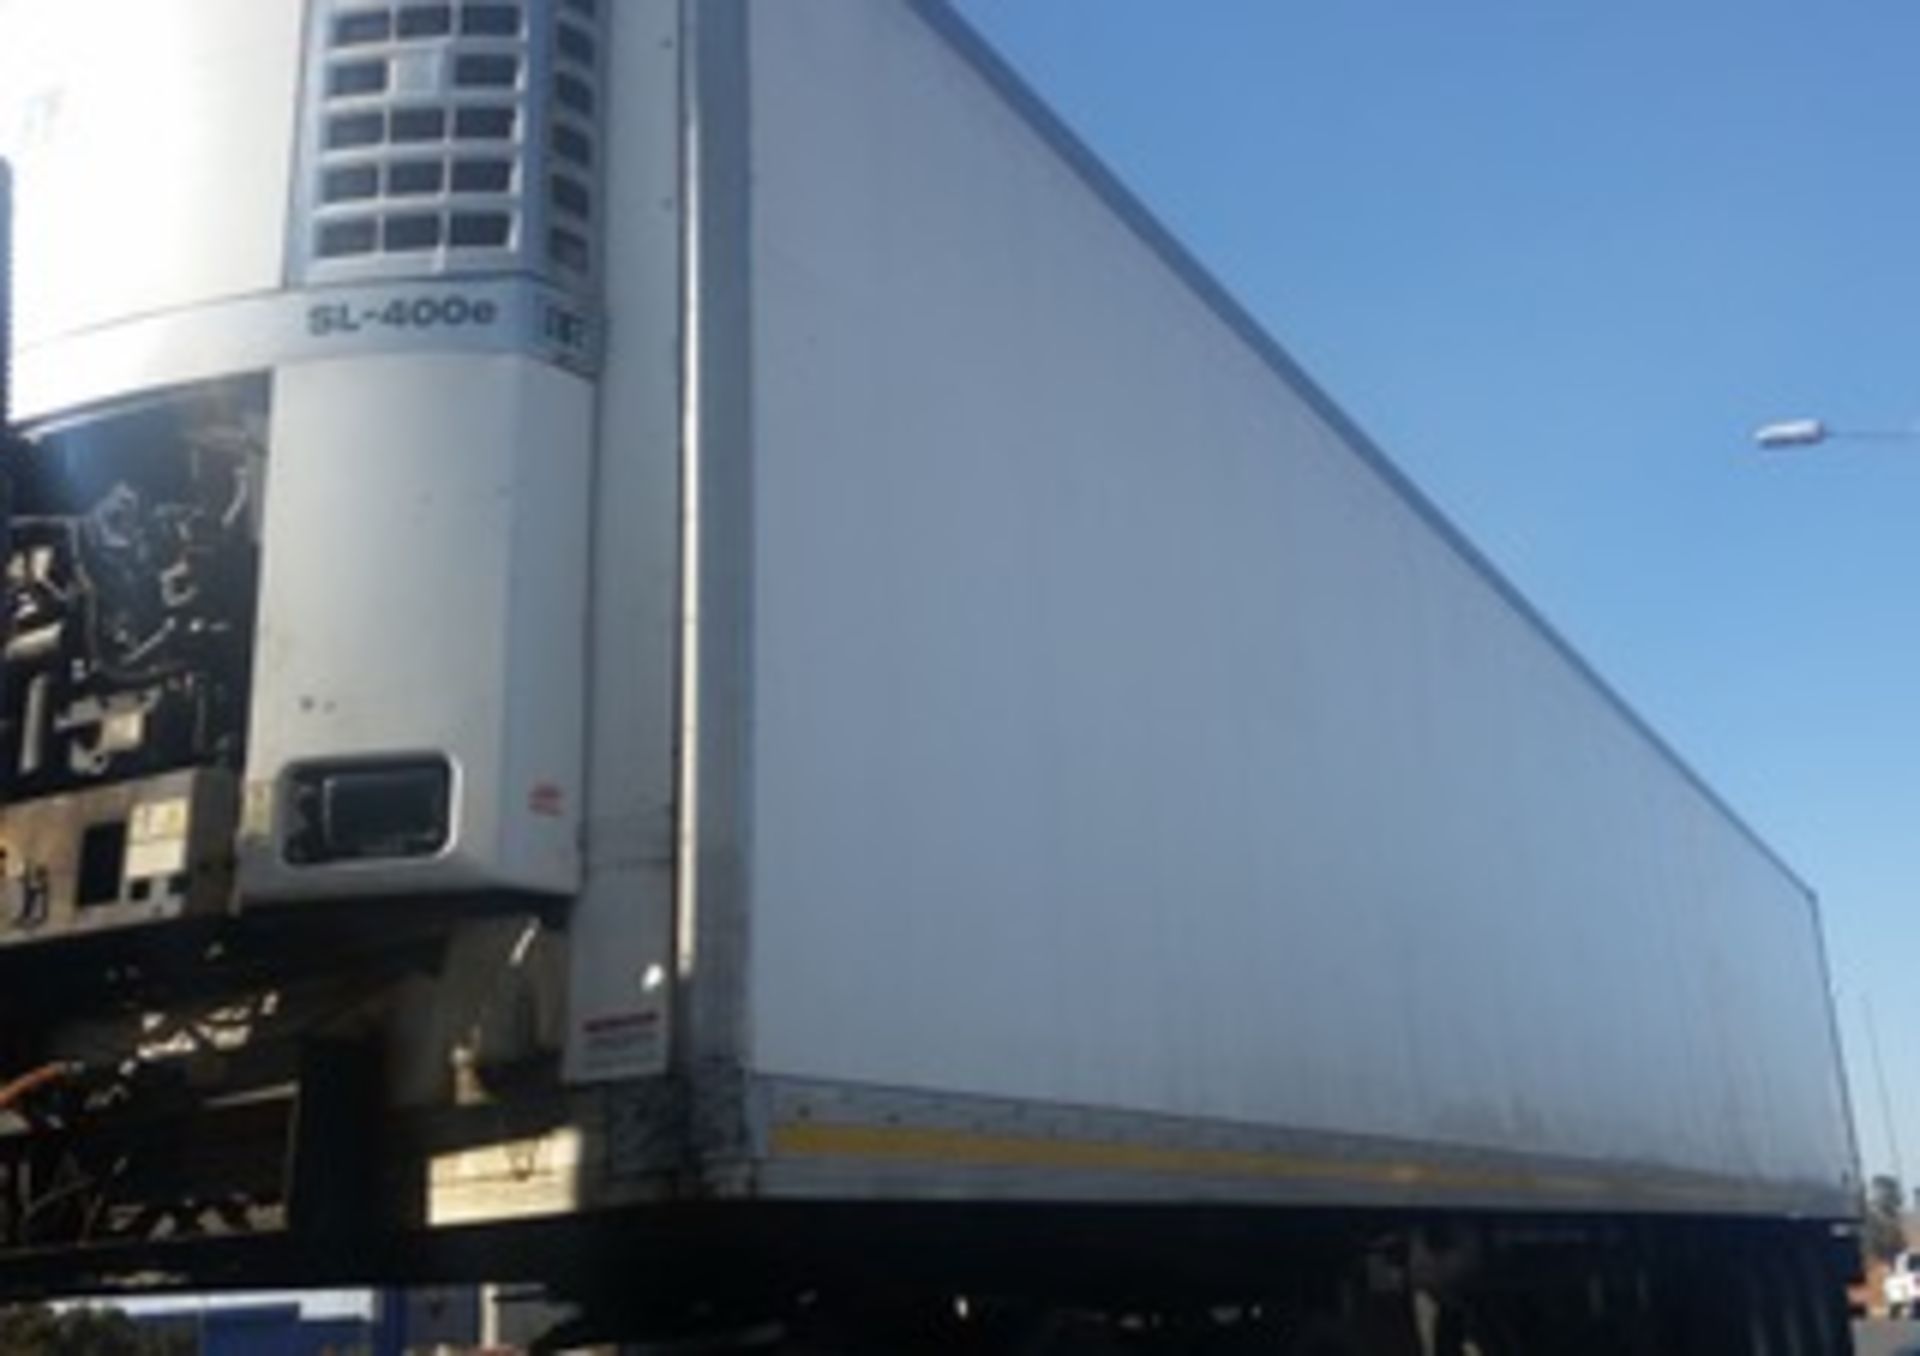 2007 CTS REFRIGERATED TRI-AXLE TRAILER - (86047) - LOCATION RUSTENBURG - Subject to Confirmation - Image 2 of 5